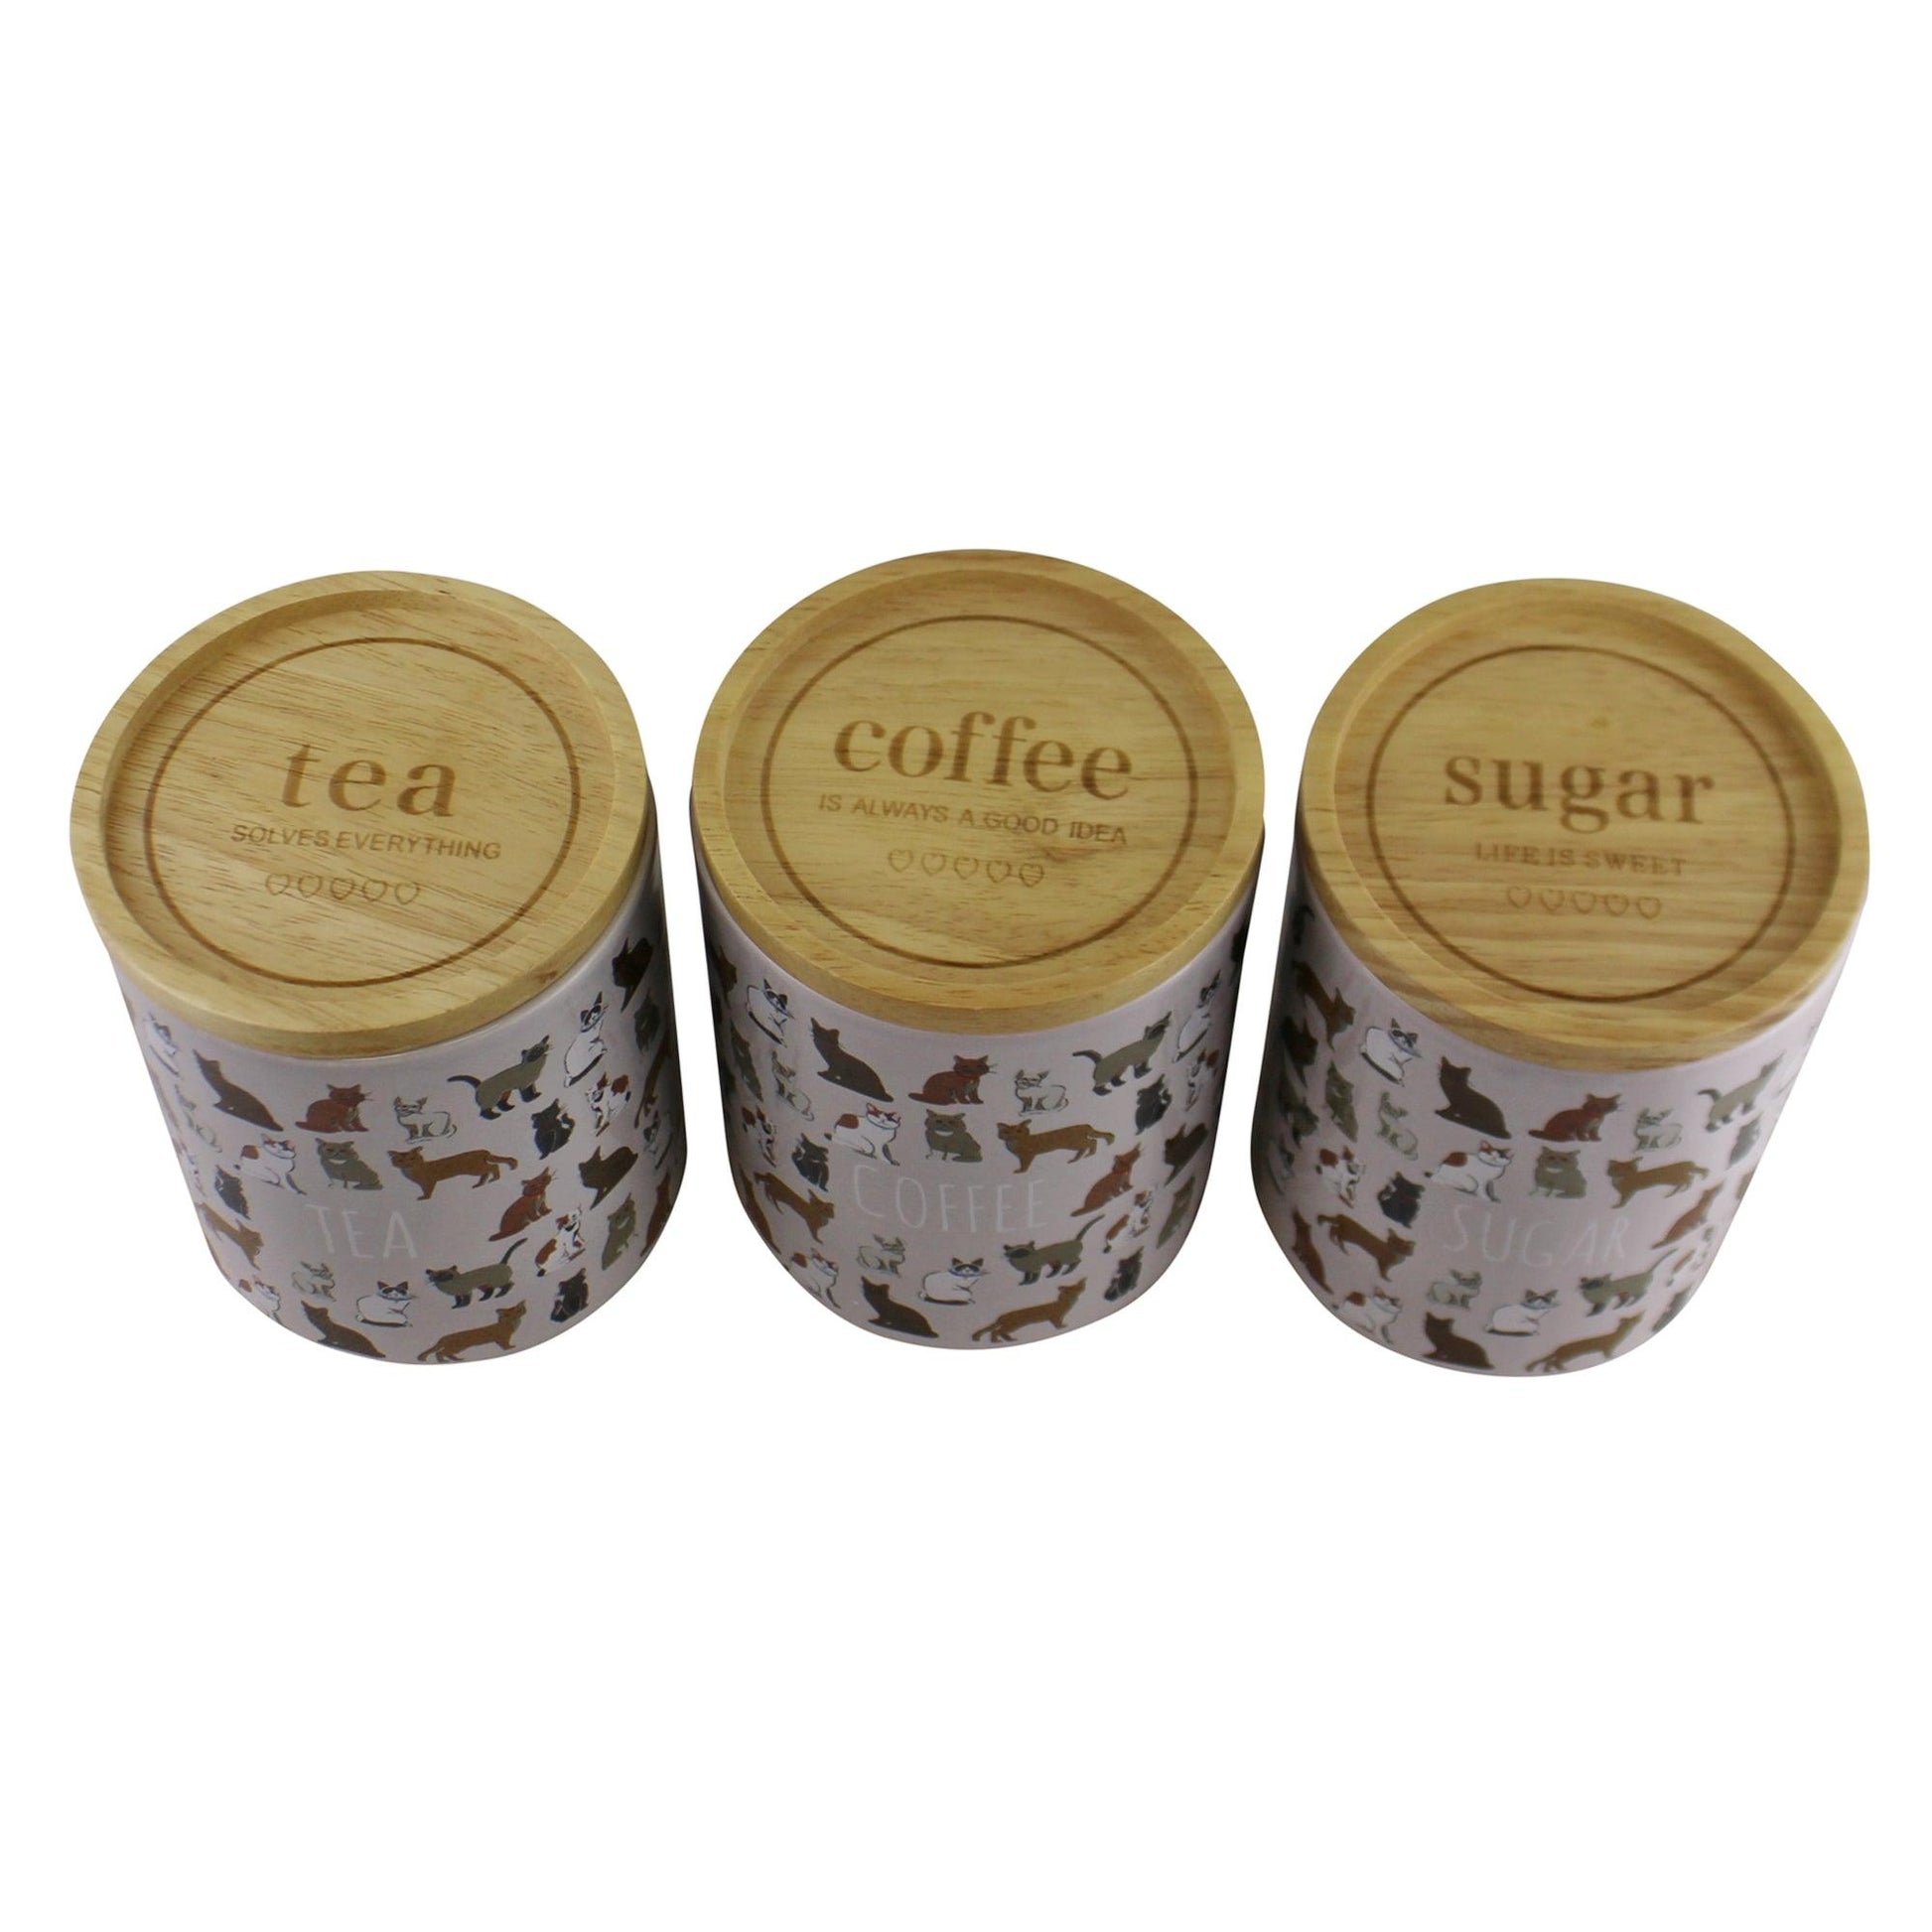 Set of 3 Ceramic Cat Design Tea, Coffee & Sugar Canisters Wooden Lids Top View